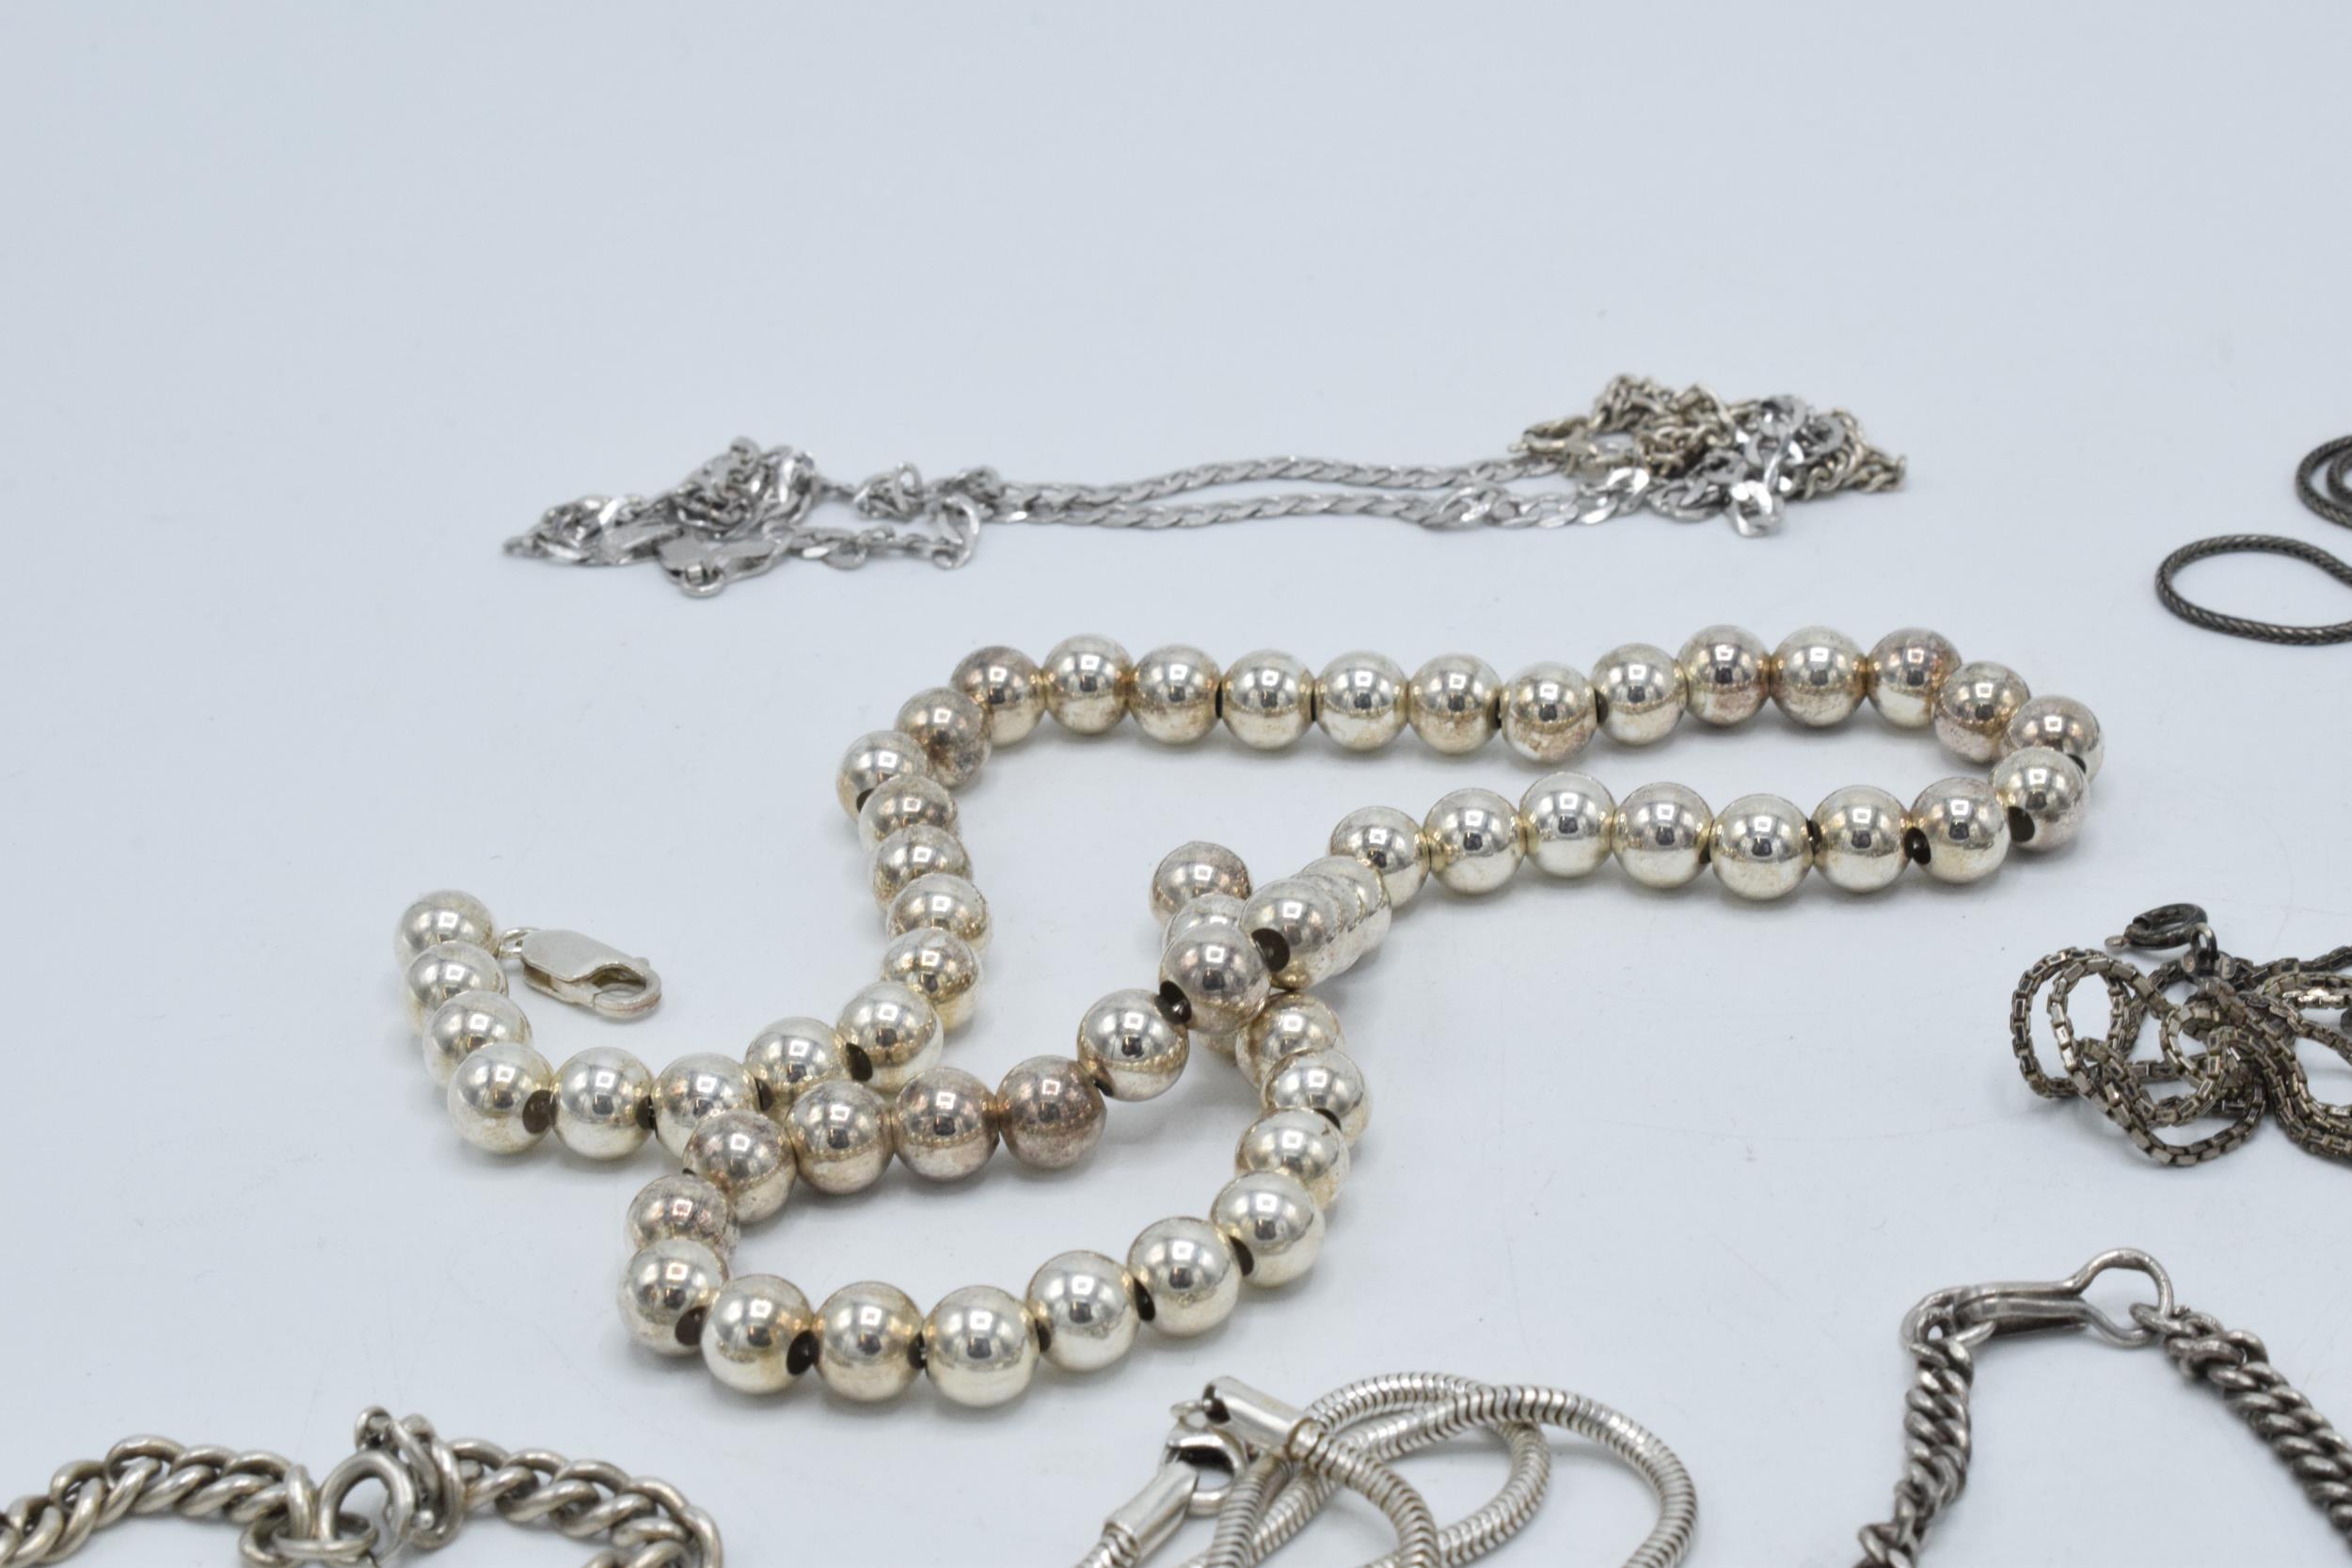 A collection of silver chains and necklaces of varying lengths and styles, 190.8 grams. - Image 6 of 6